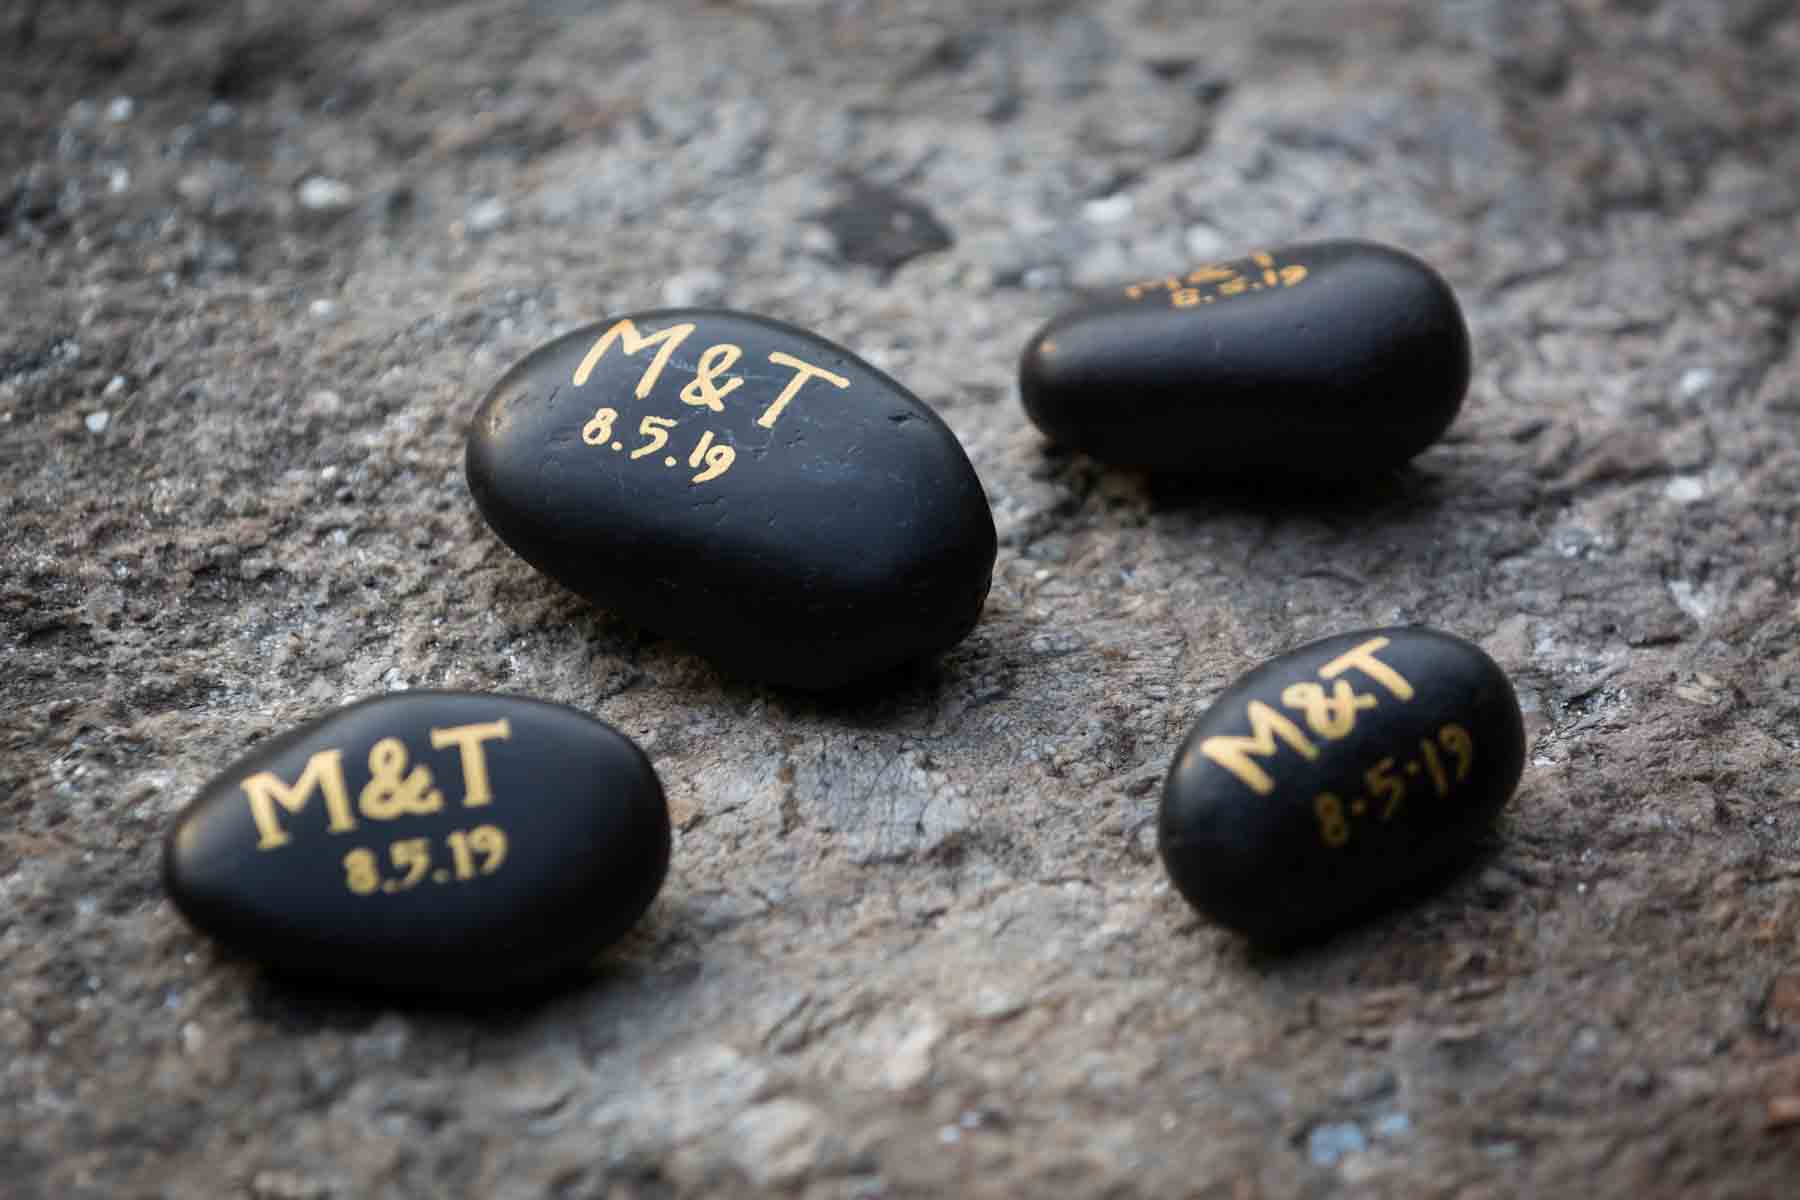 Engraved stones for an article entitled, ‘Do you need a permit to get married in Central Park?’